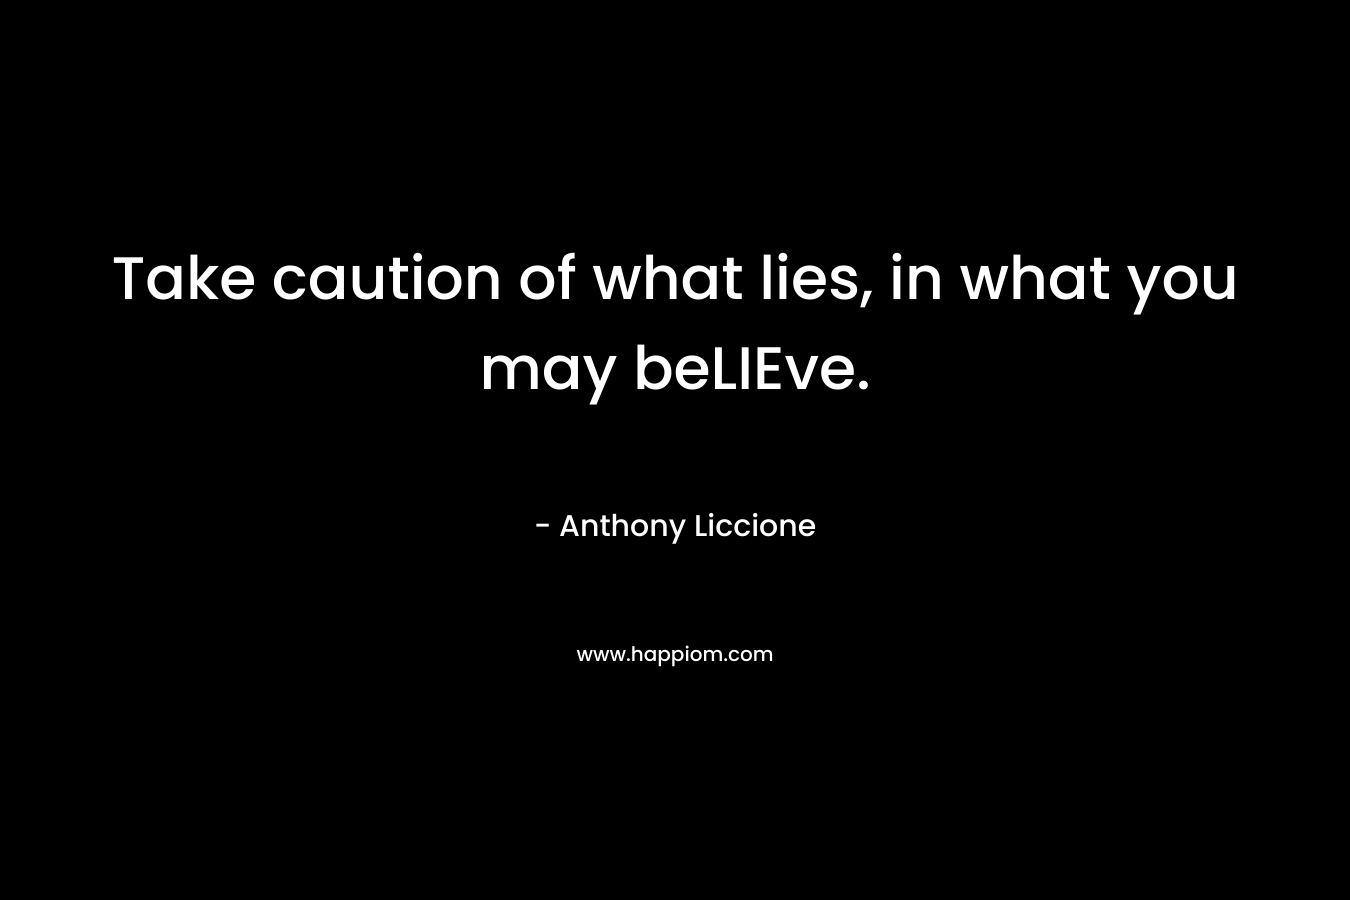 Take caution of what lies, in what you may beLIEve. – Anthony Liccione